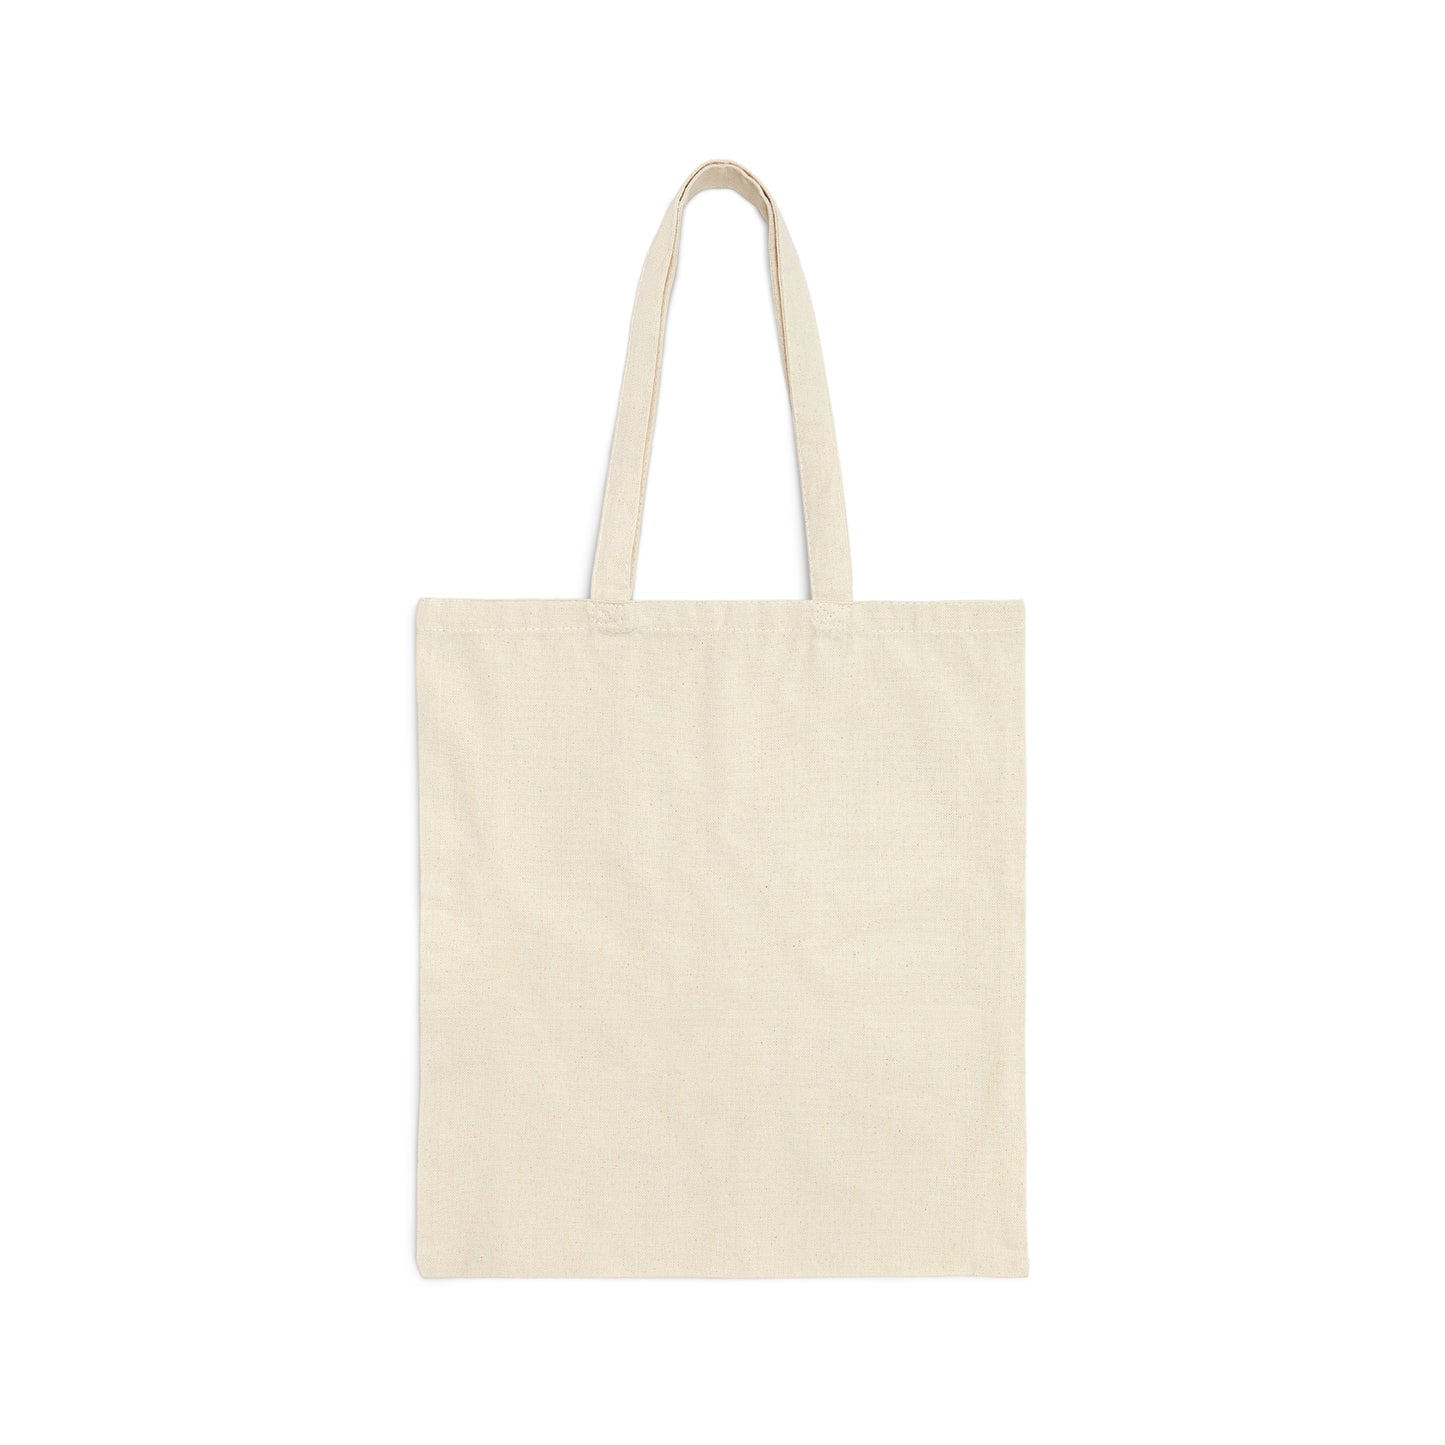 Wine Art Minimal Aesthetic Food Classic Canvas Shopping Cotton Tote Bag